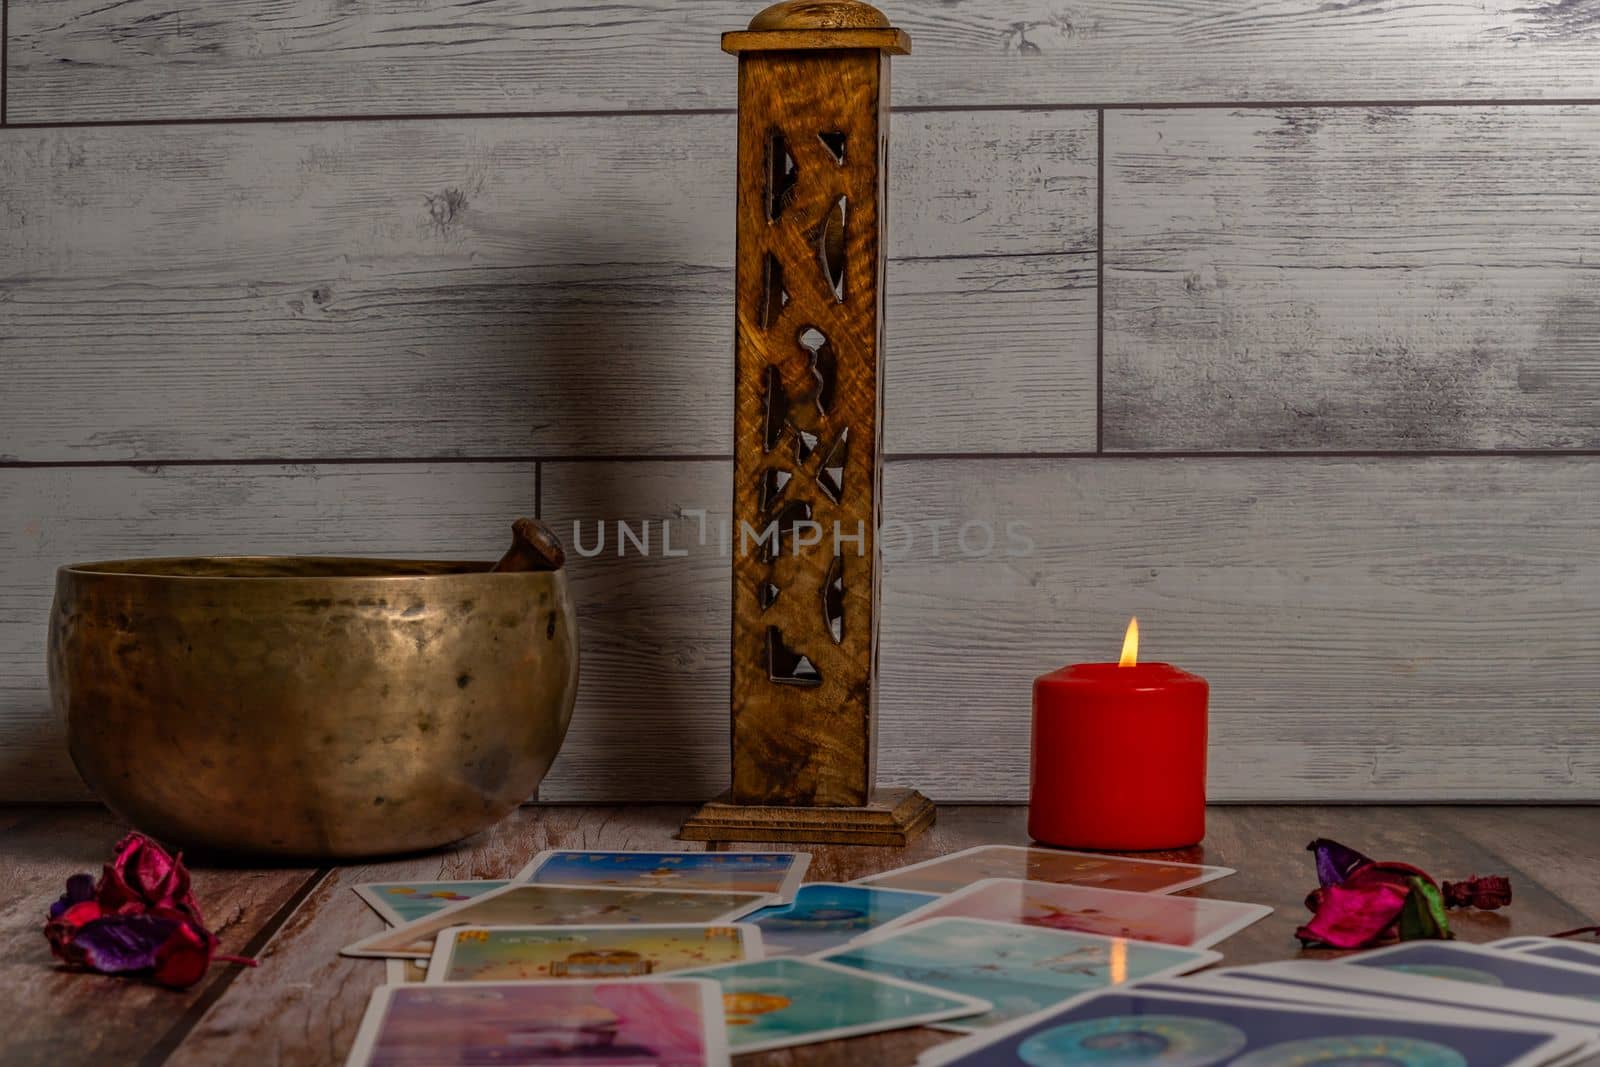 colorful tarot cards "oracle" lighted red candle, Tibetan bowl and incense burner on a wooden table and copy space